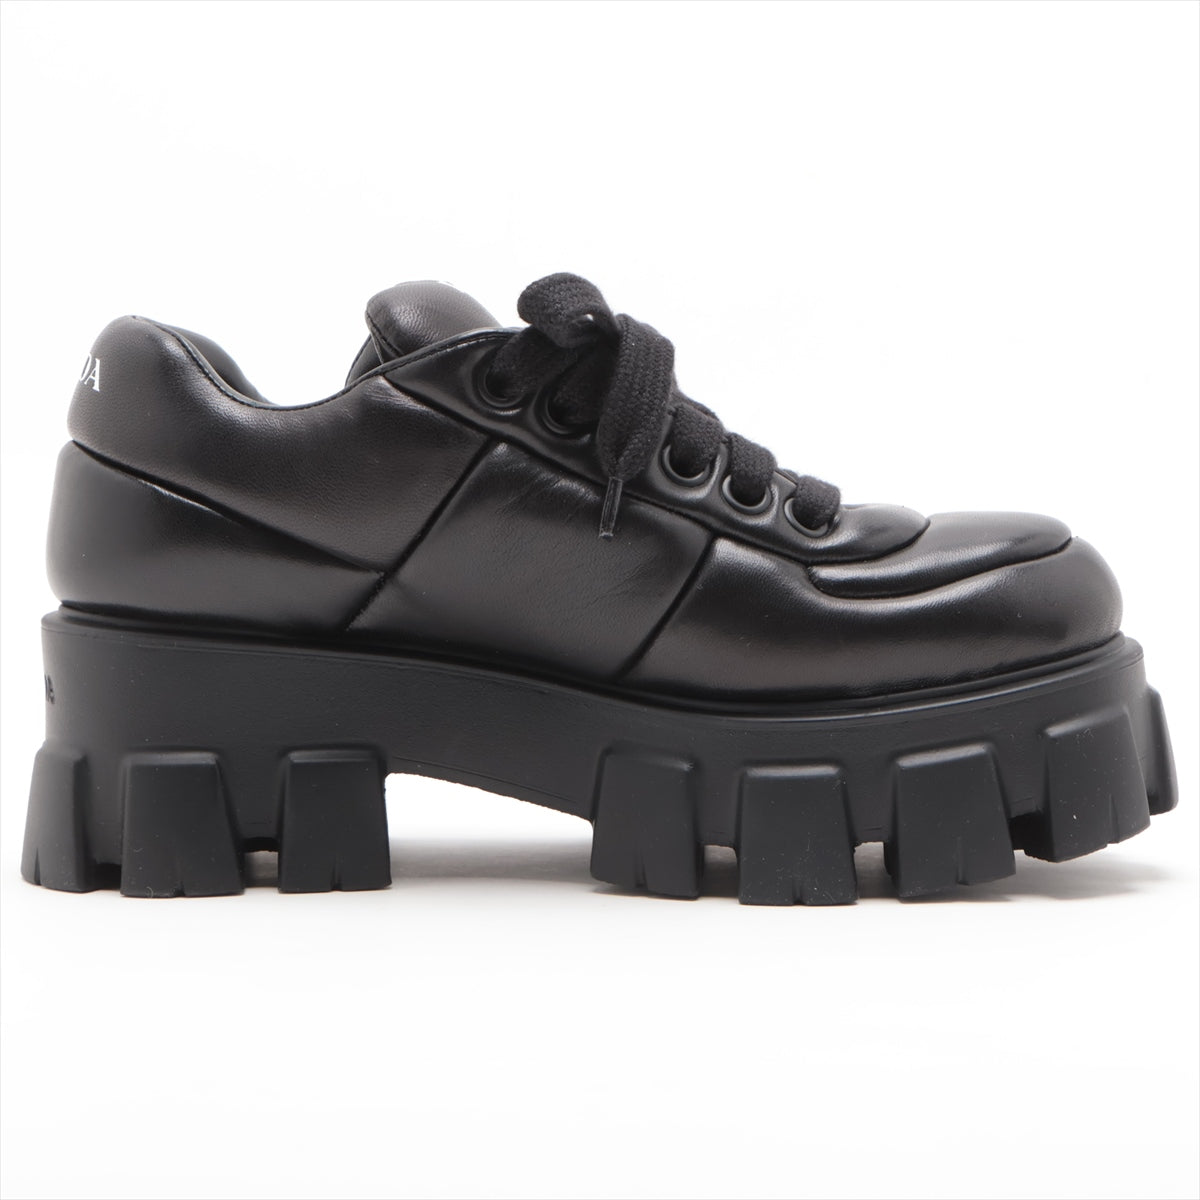 Prada Leather Sneakers 36 Ladies' Black Triangle logo putted Monolith